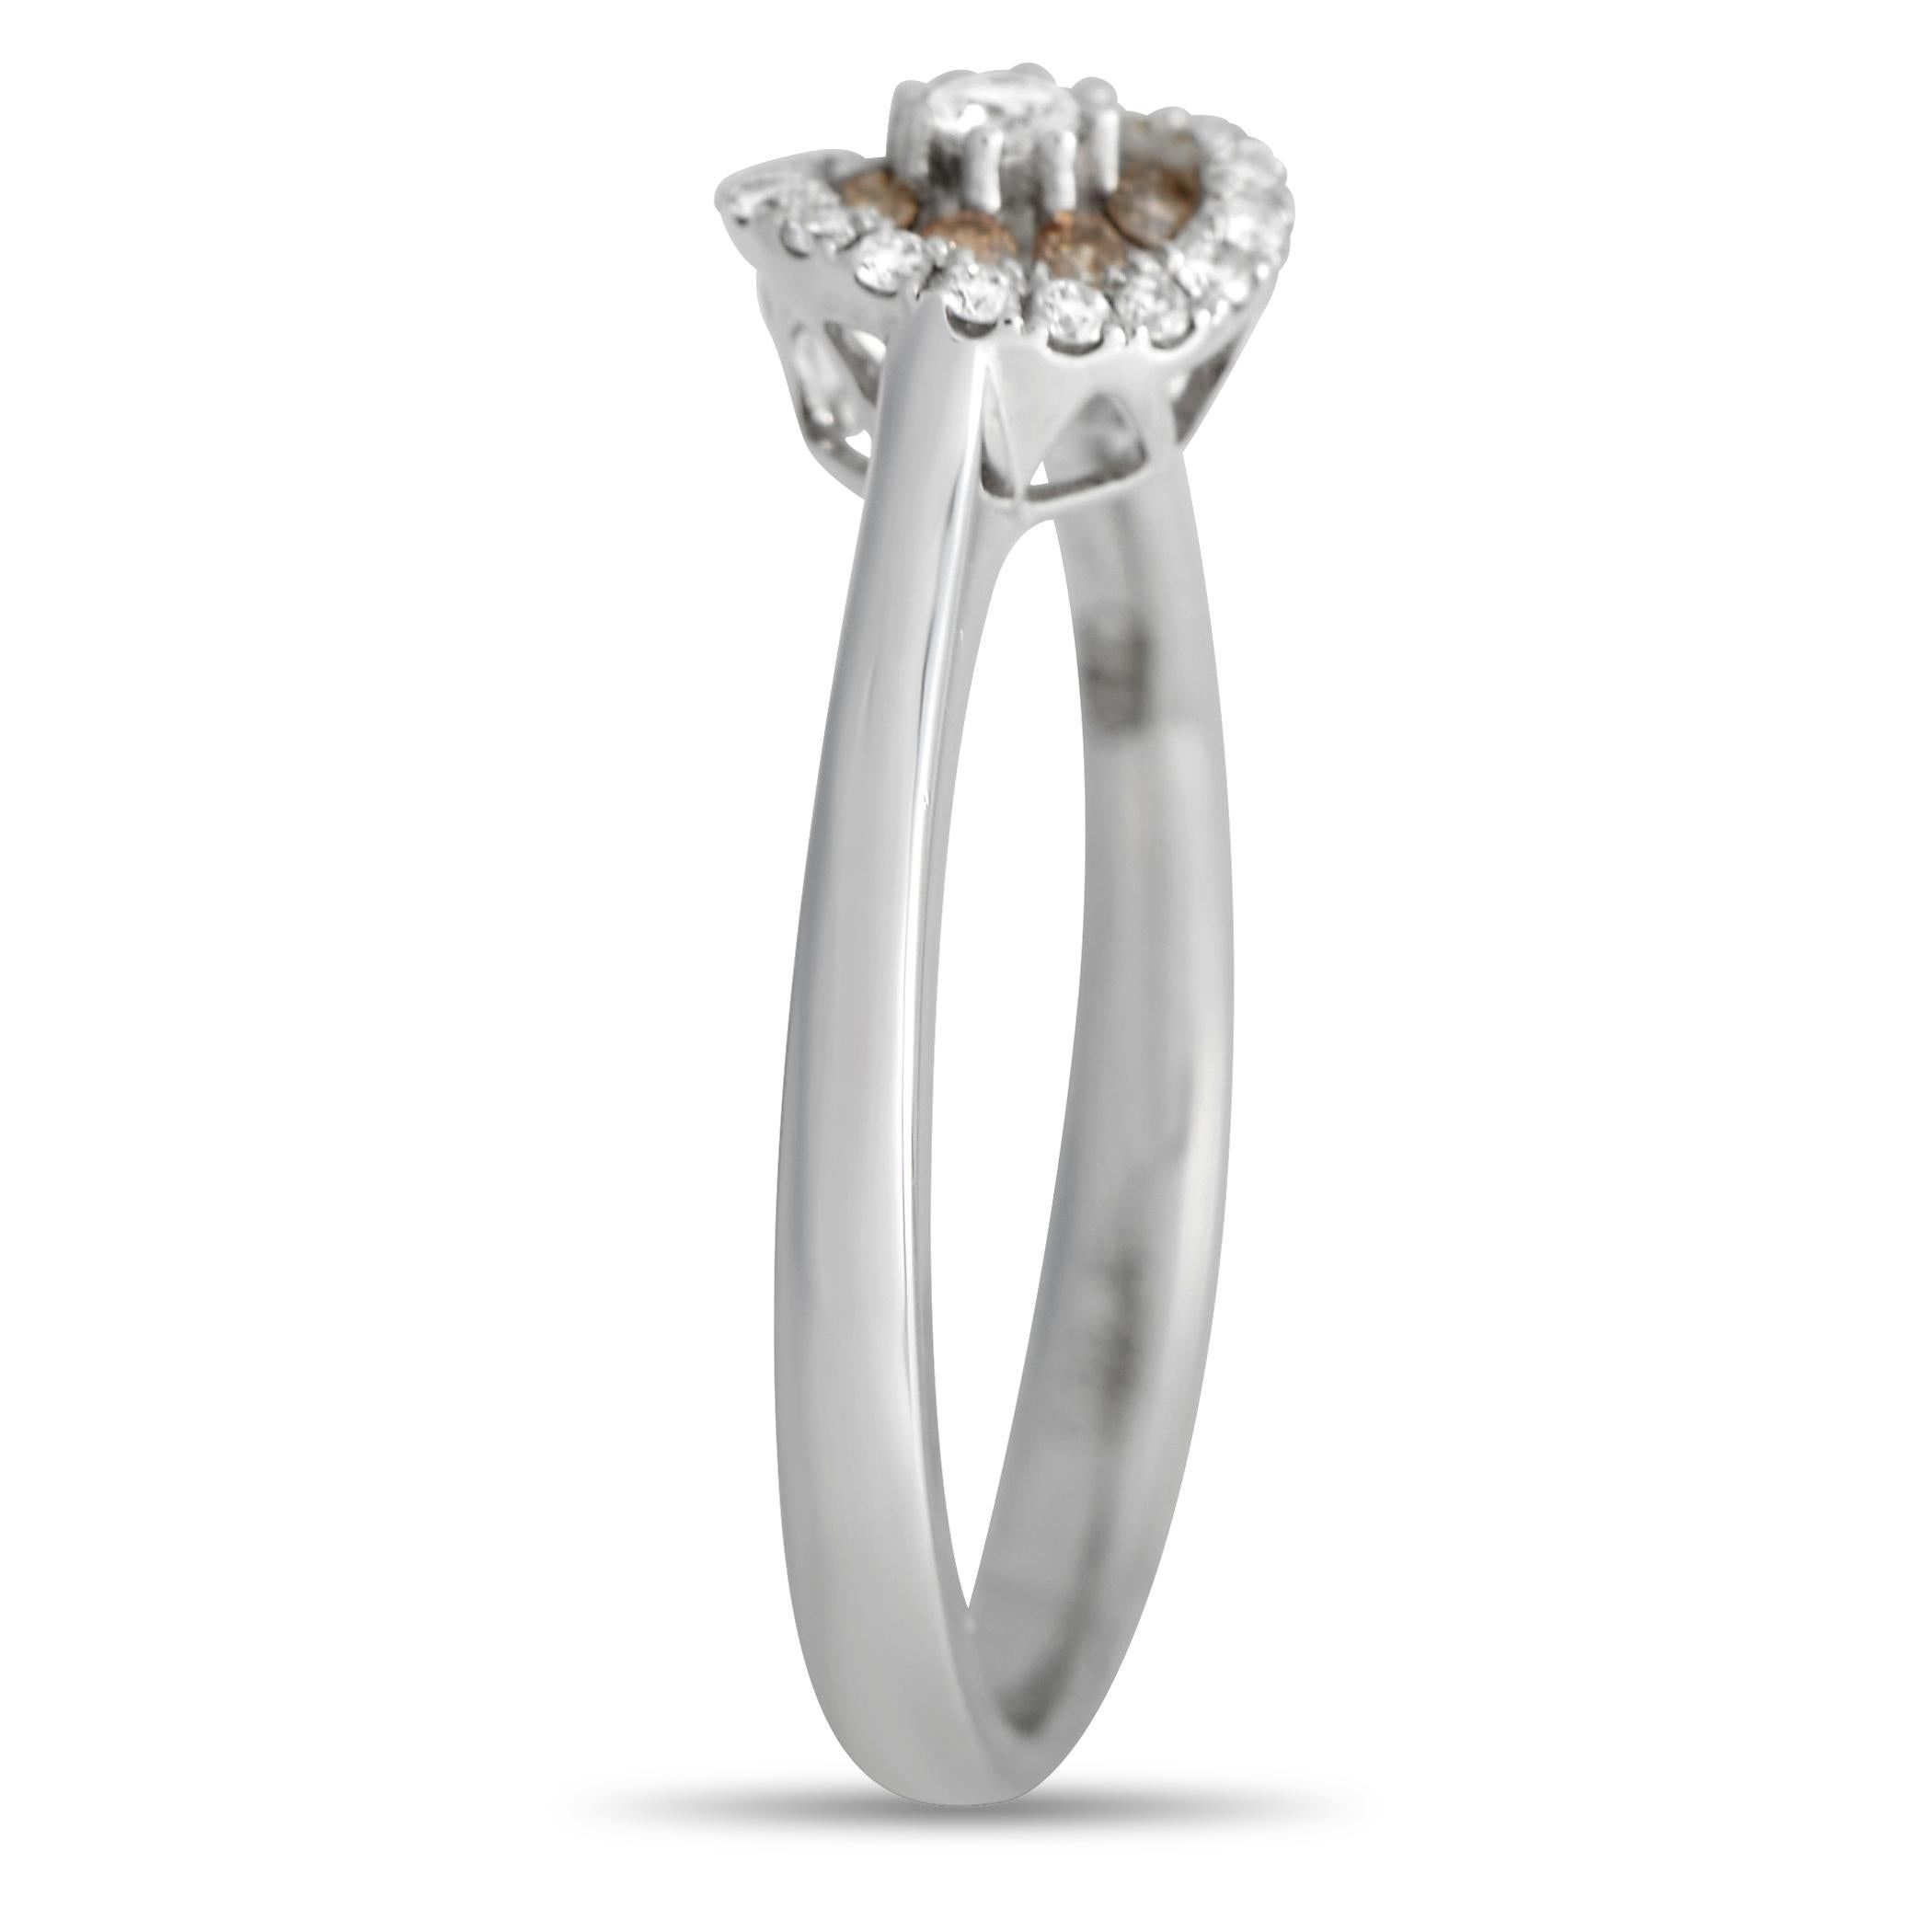 Light and dark colored diamonds totaling 0.28 carats come together in perfect harmony on this simple, elegant Piero Milano ring. The minimalist 18K White Gold setting features a 2mm wide band and a 5mm top height, making it a comfortable piece that